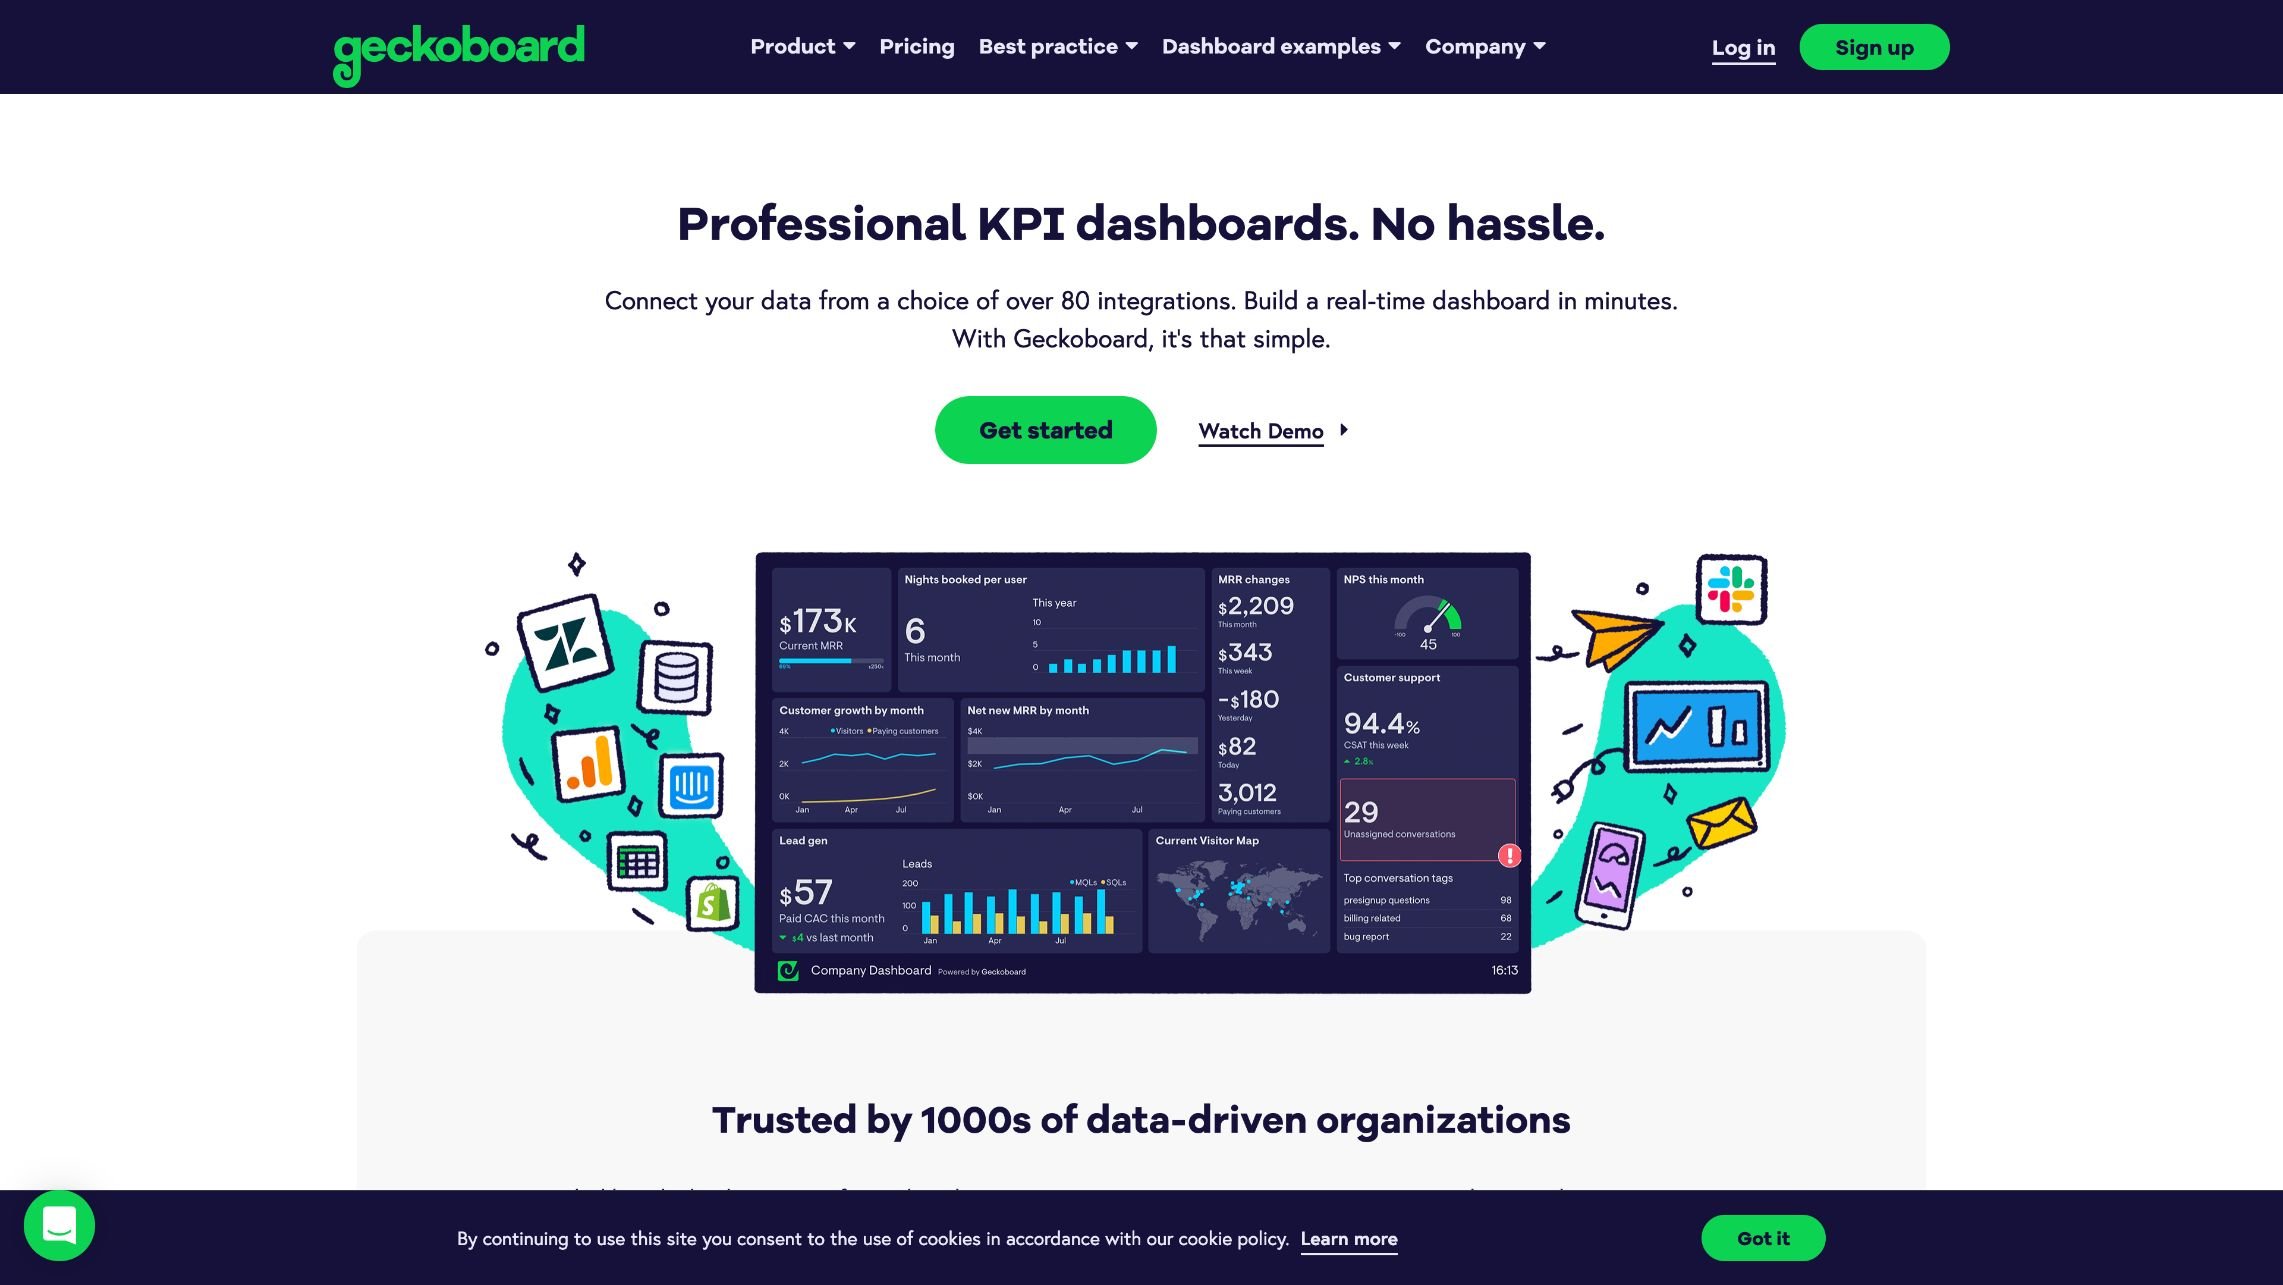 Geckoboard Home Page